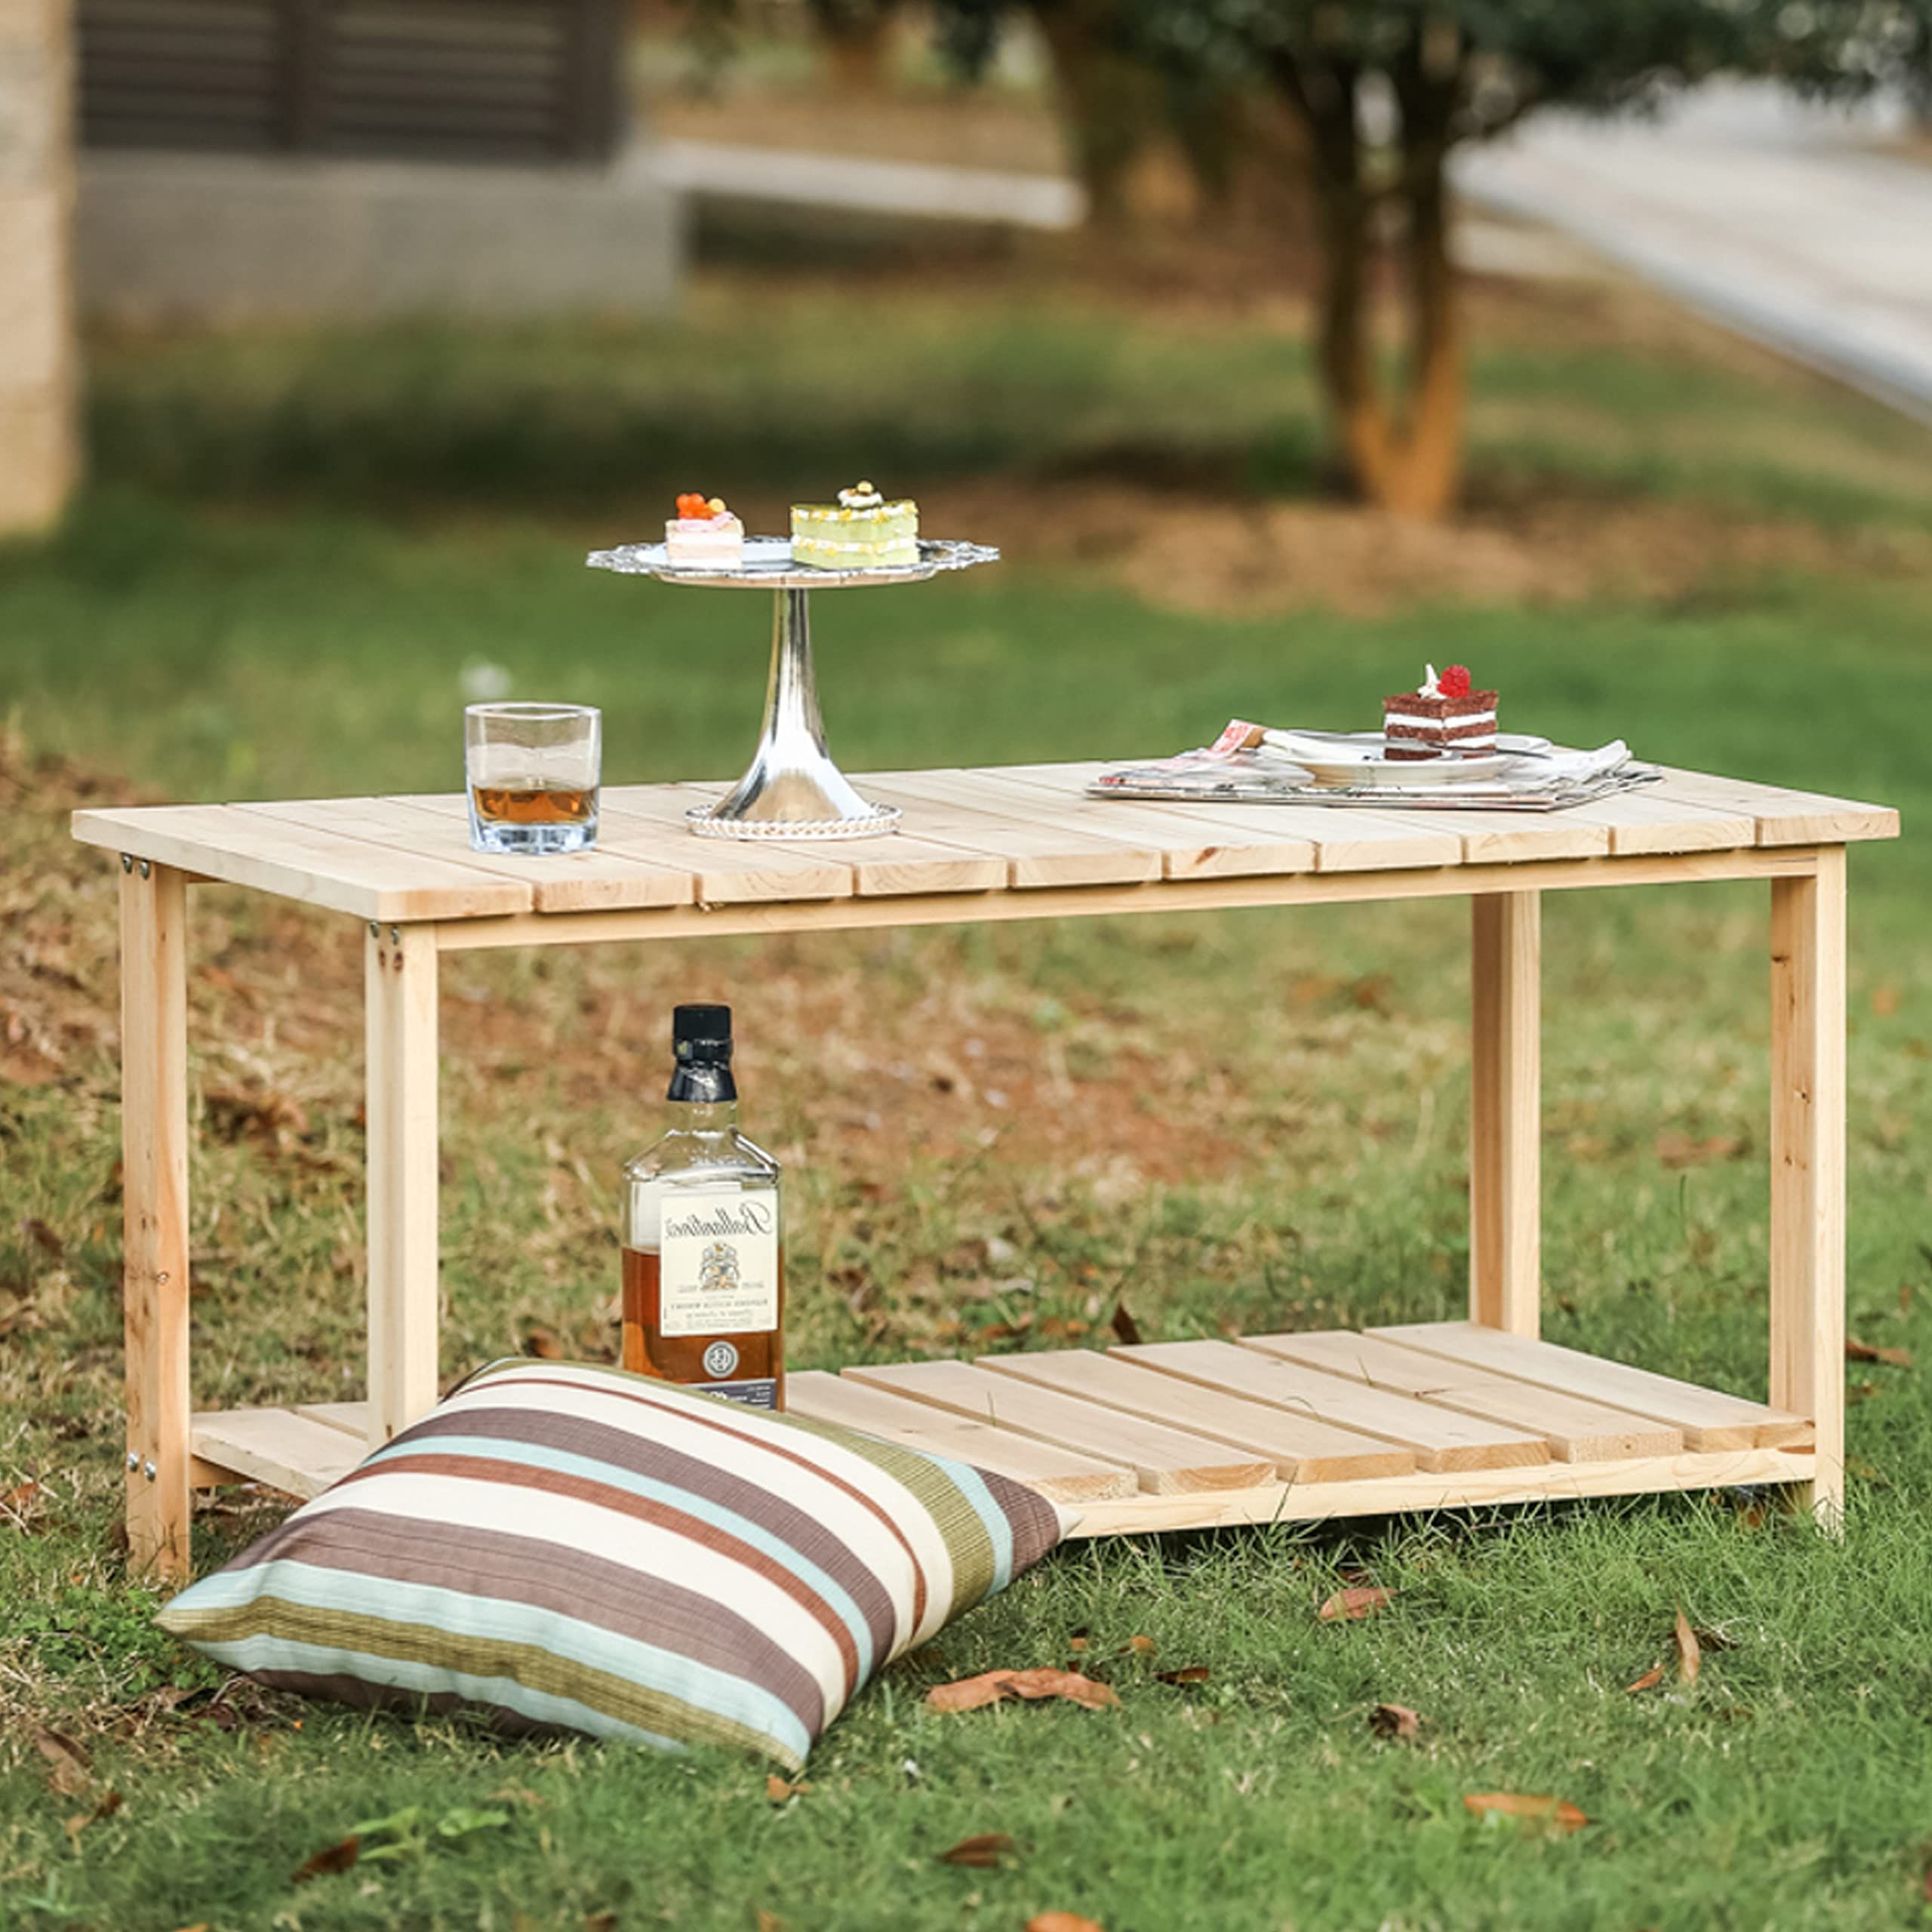 Buy Lokatse Home Outdoor Natural Wood Coffee Table With 2 Tier Storage Pertaining To Most Popular Wood Coffee Tables With 2 Tier Storage (View 4 of 15)